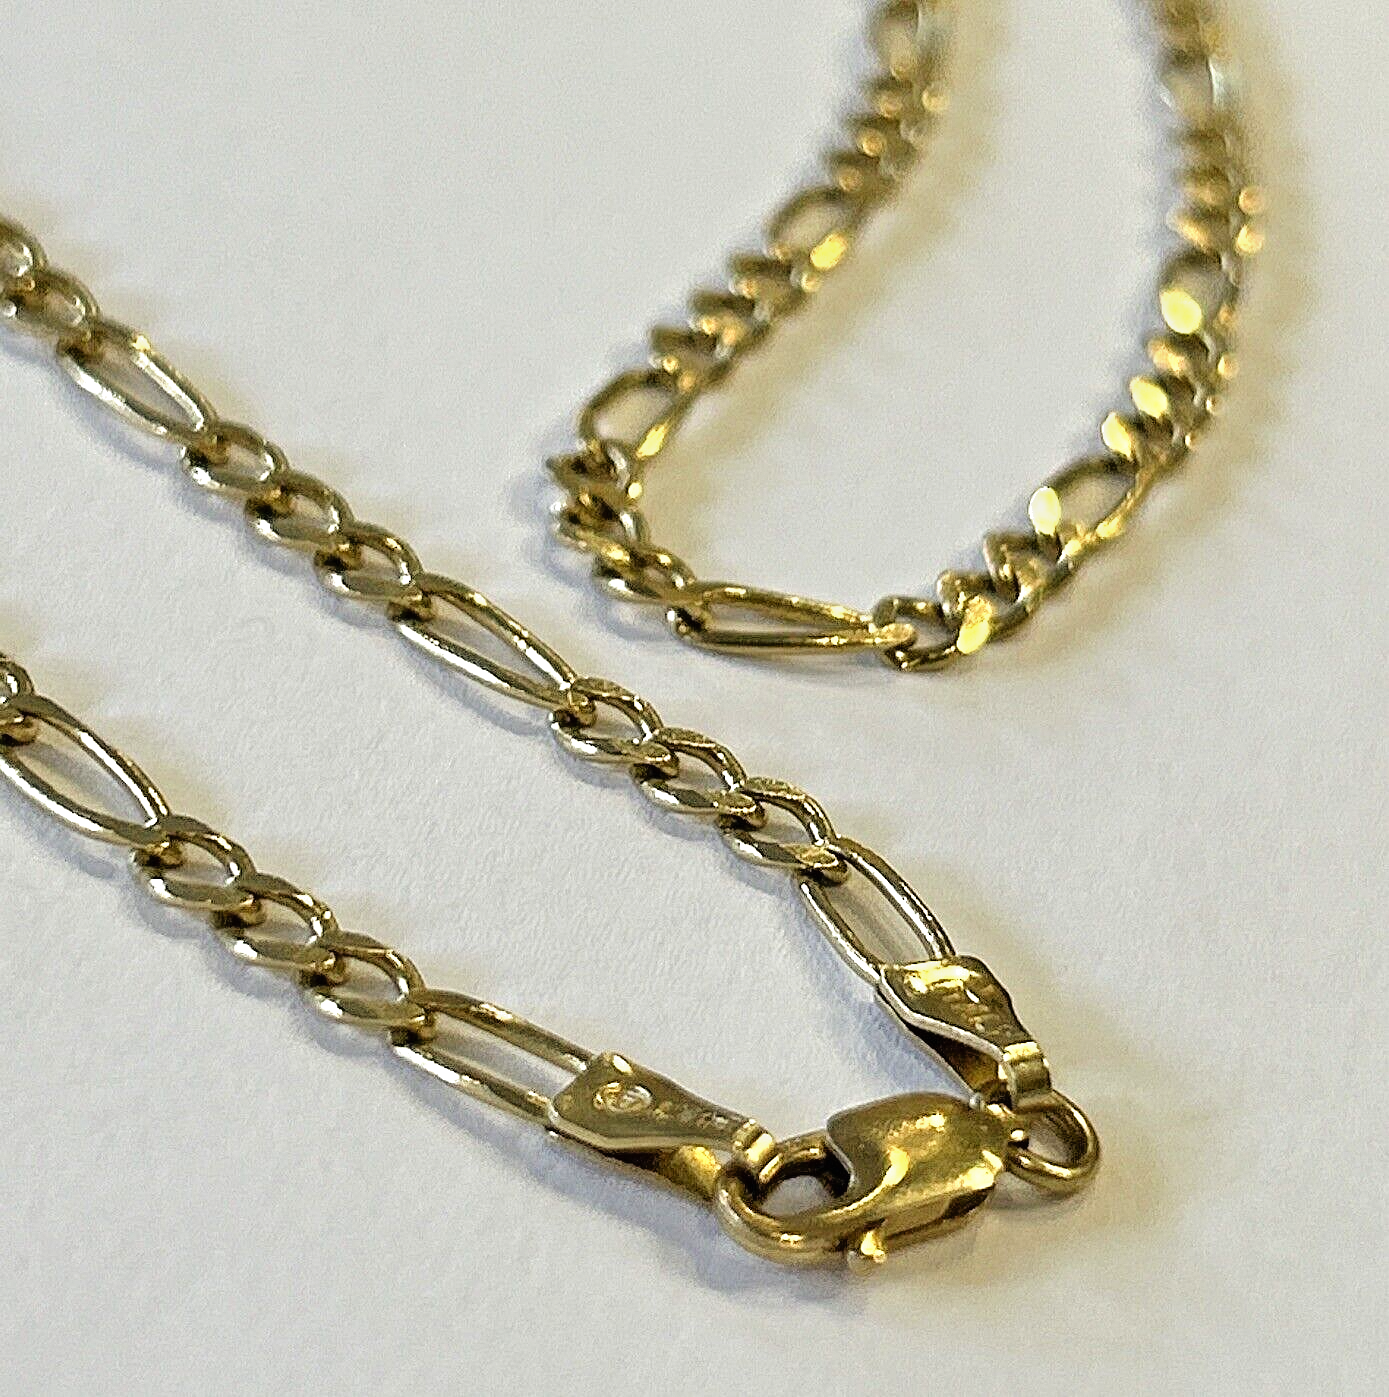 14k Gold Italy Figaro Link Chain 24" Inch - 10.1 grams - 3.3mm